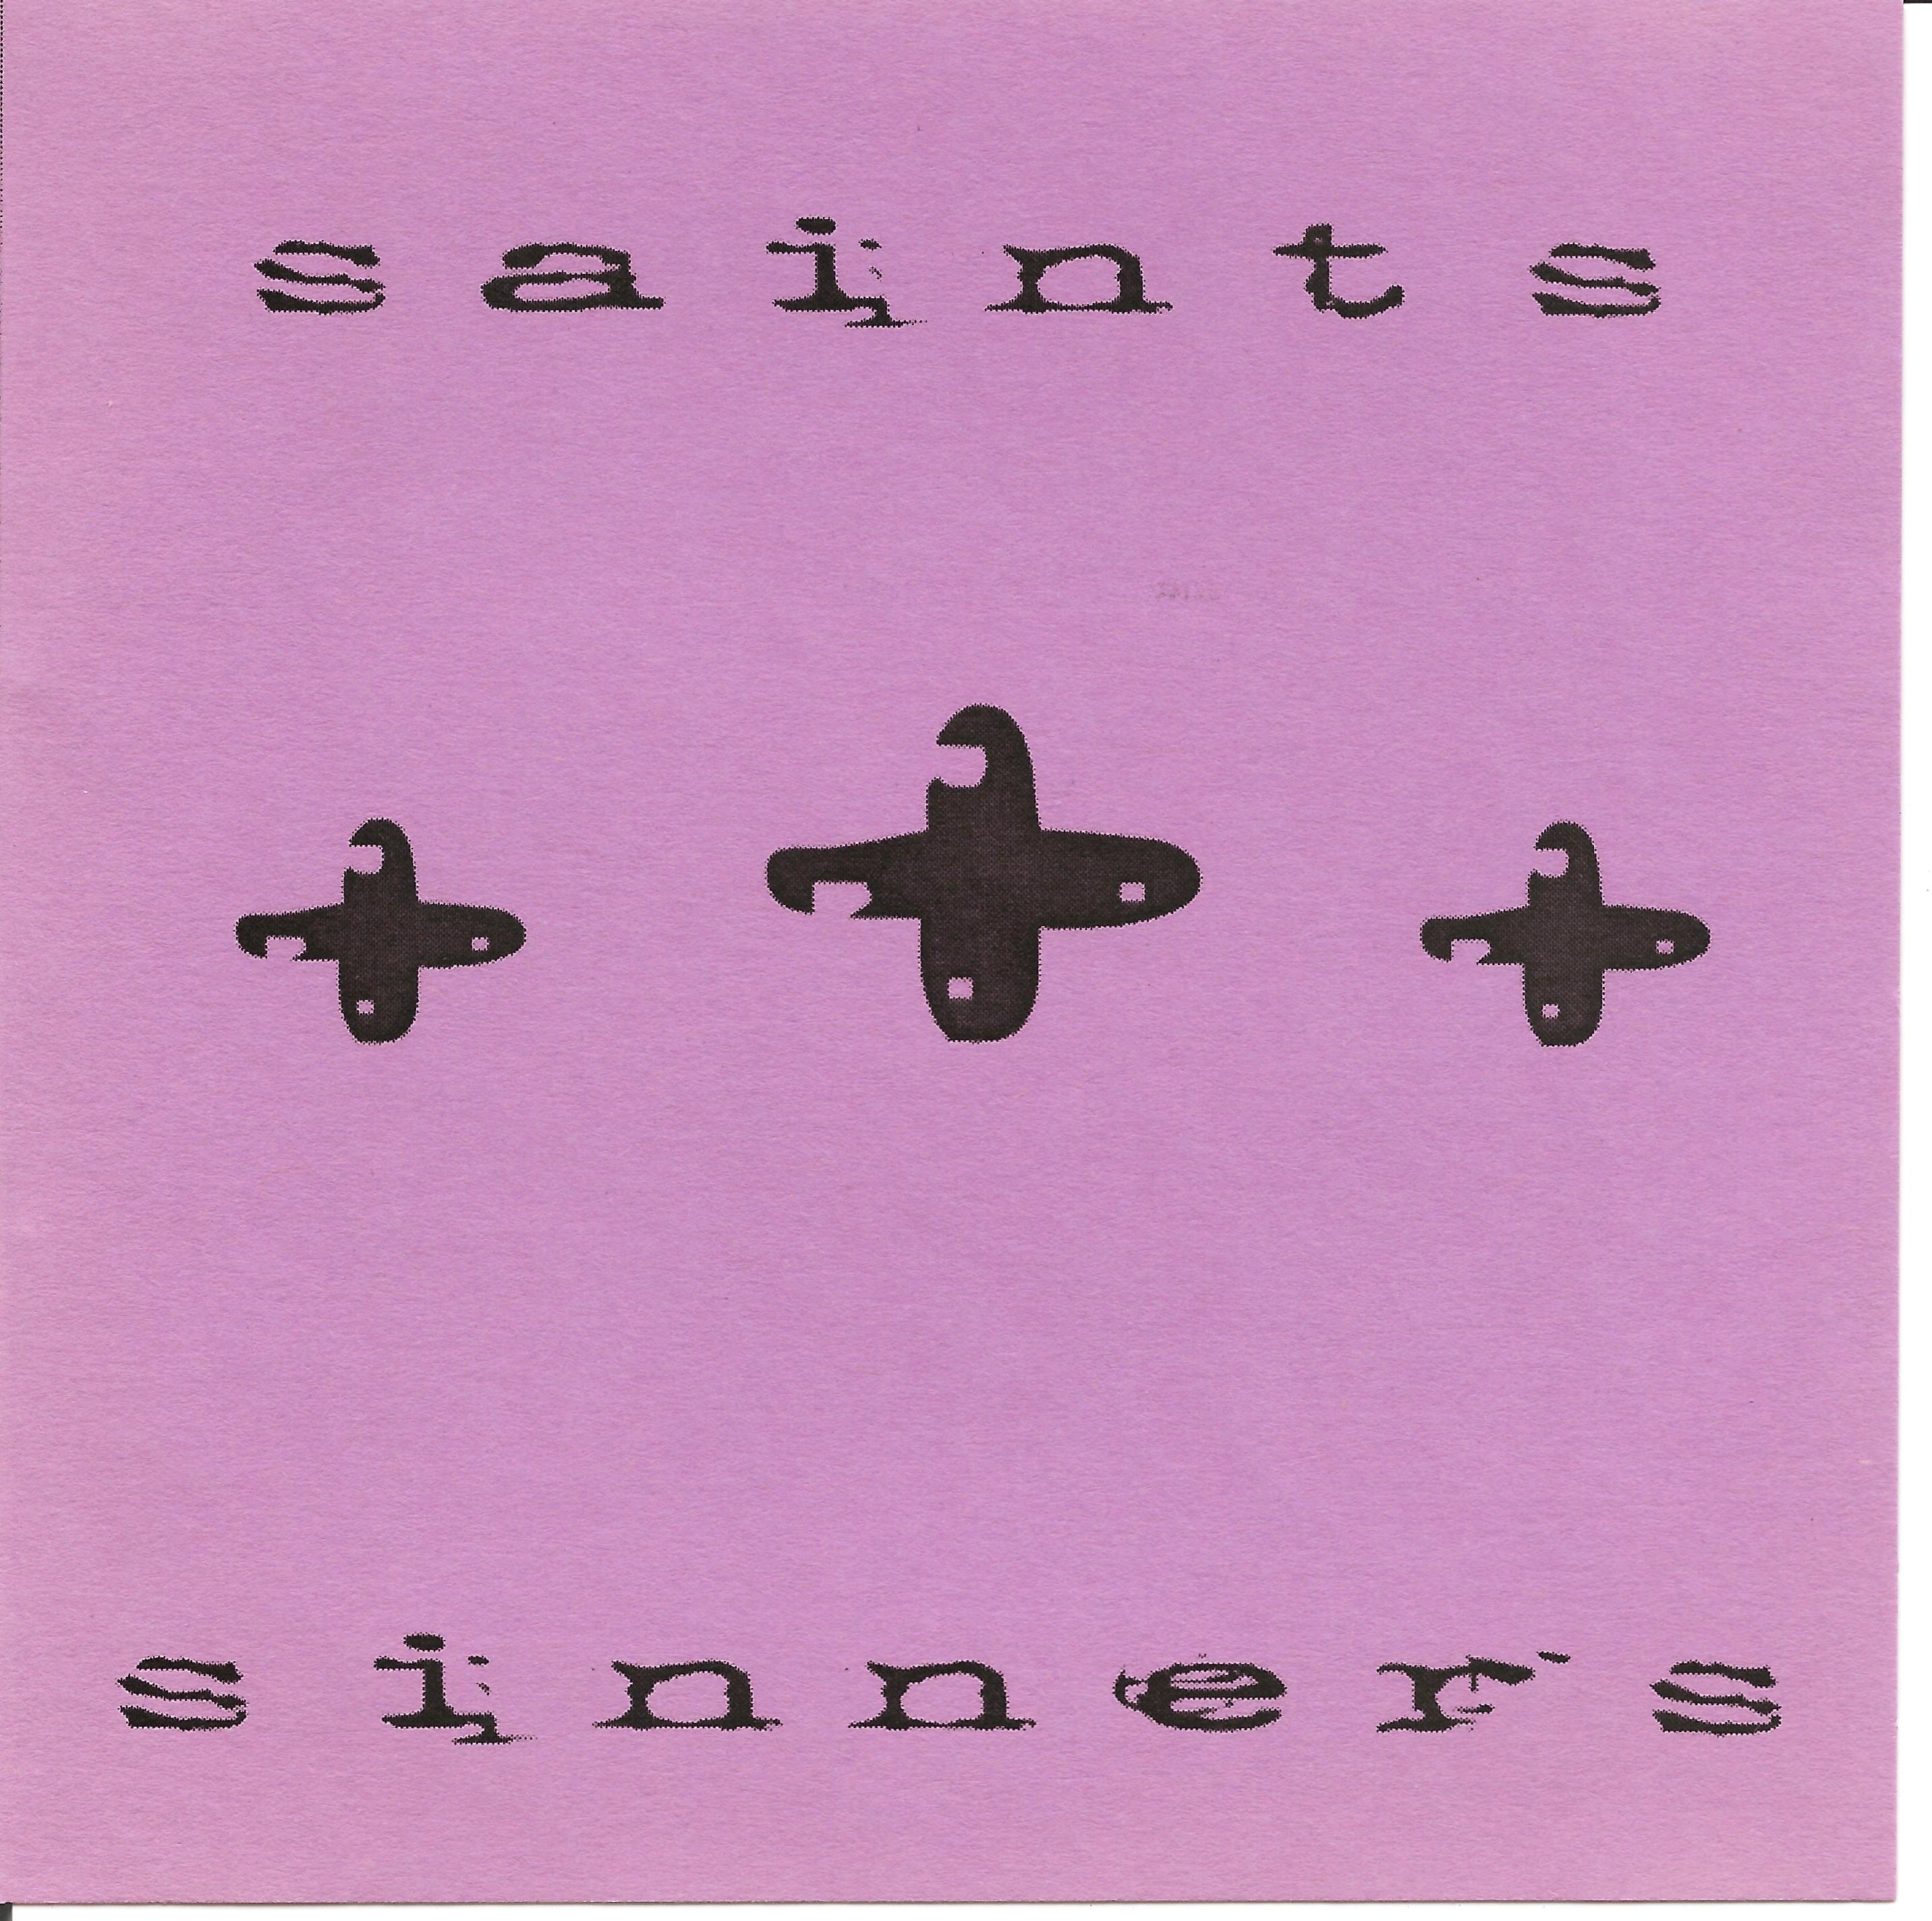 Saints And Sinners